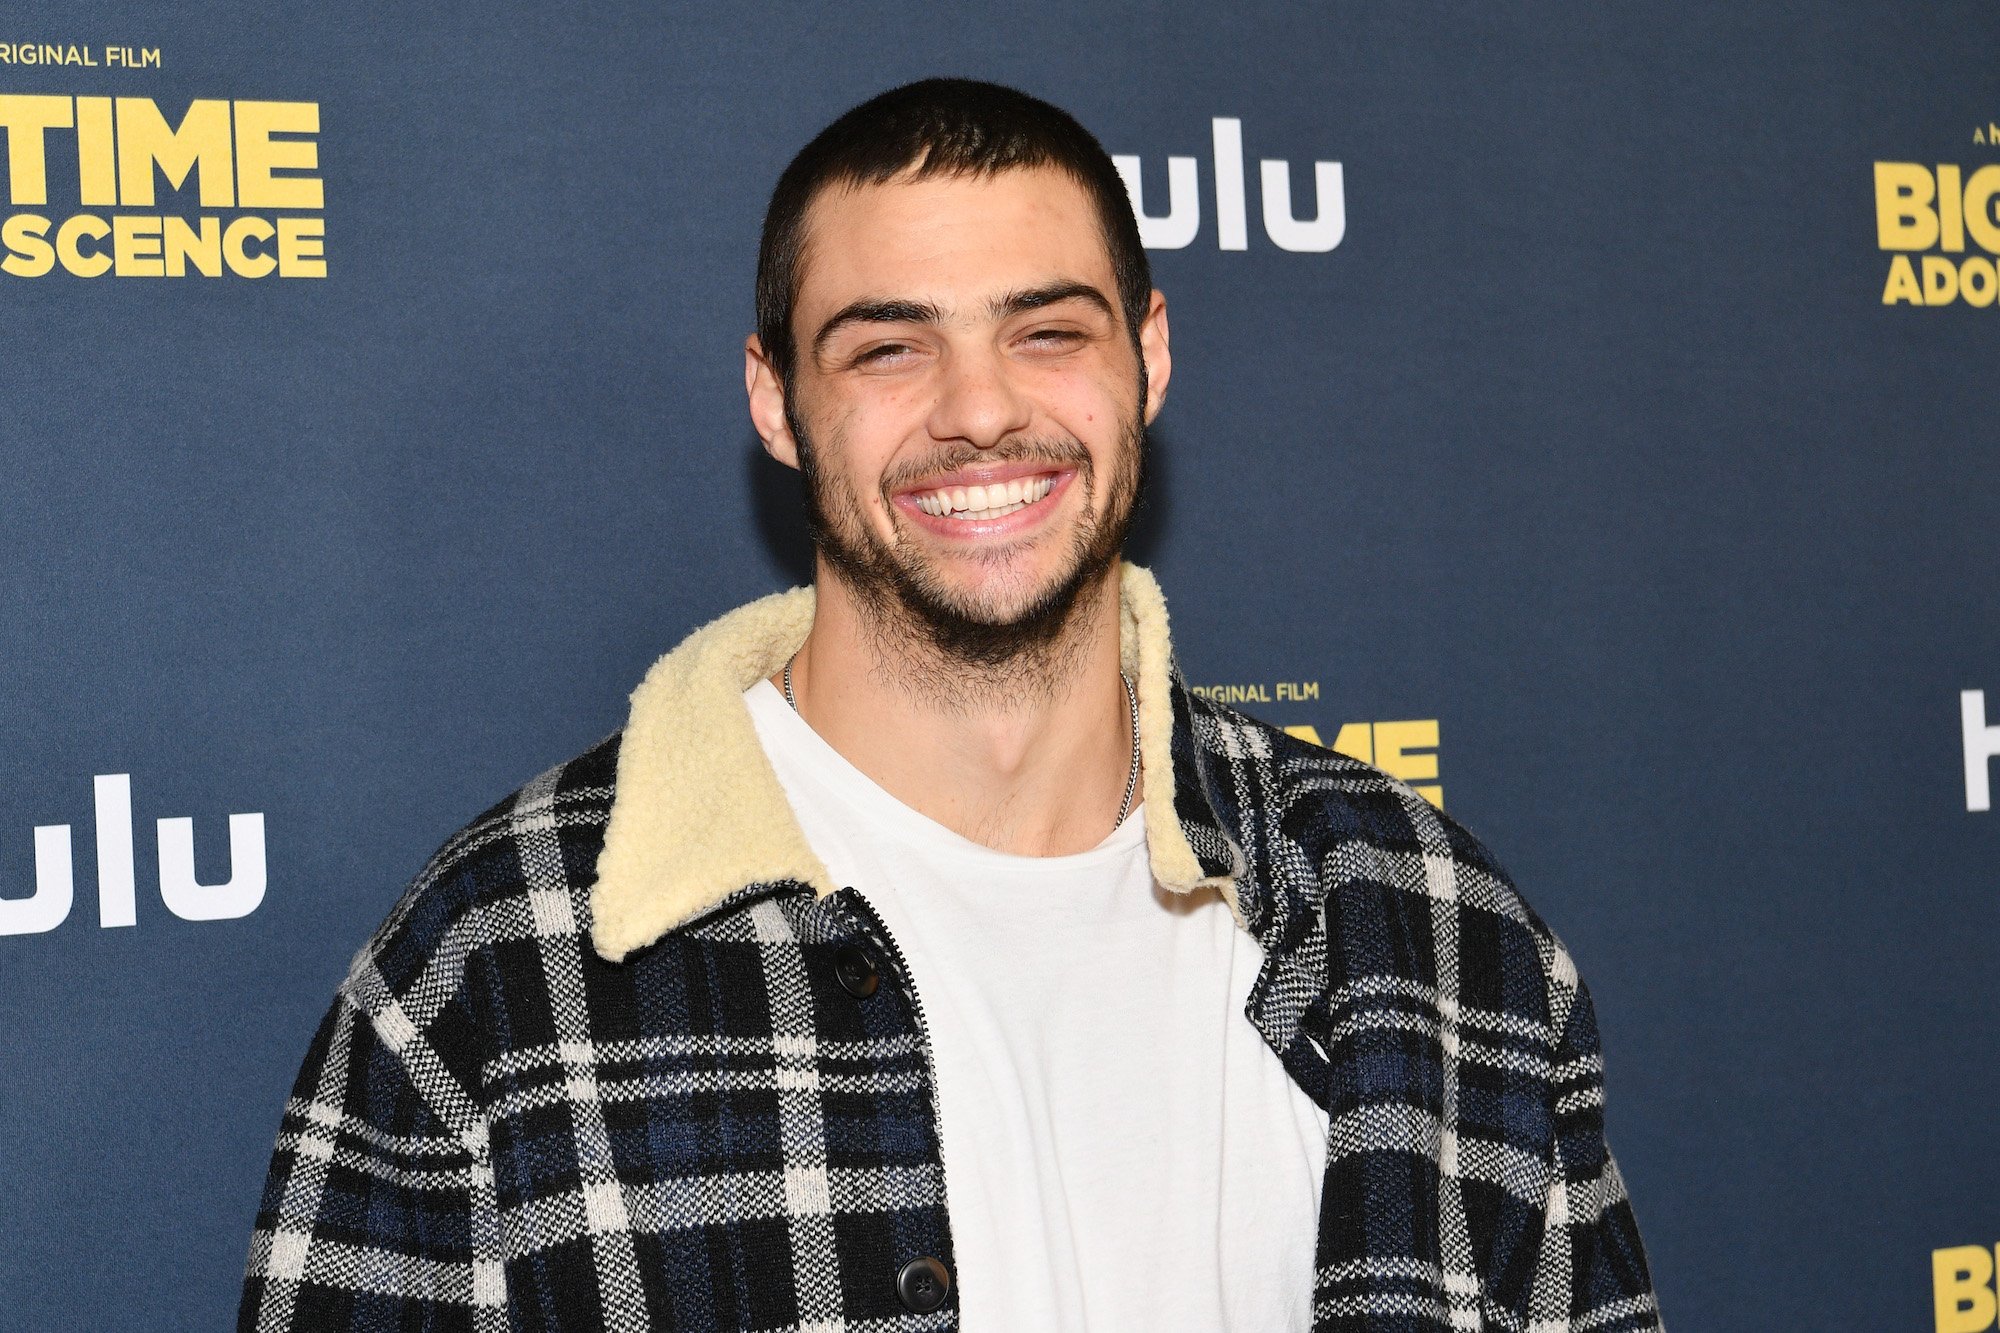 Noah Centineo smiling in front of a navy blue background